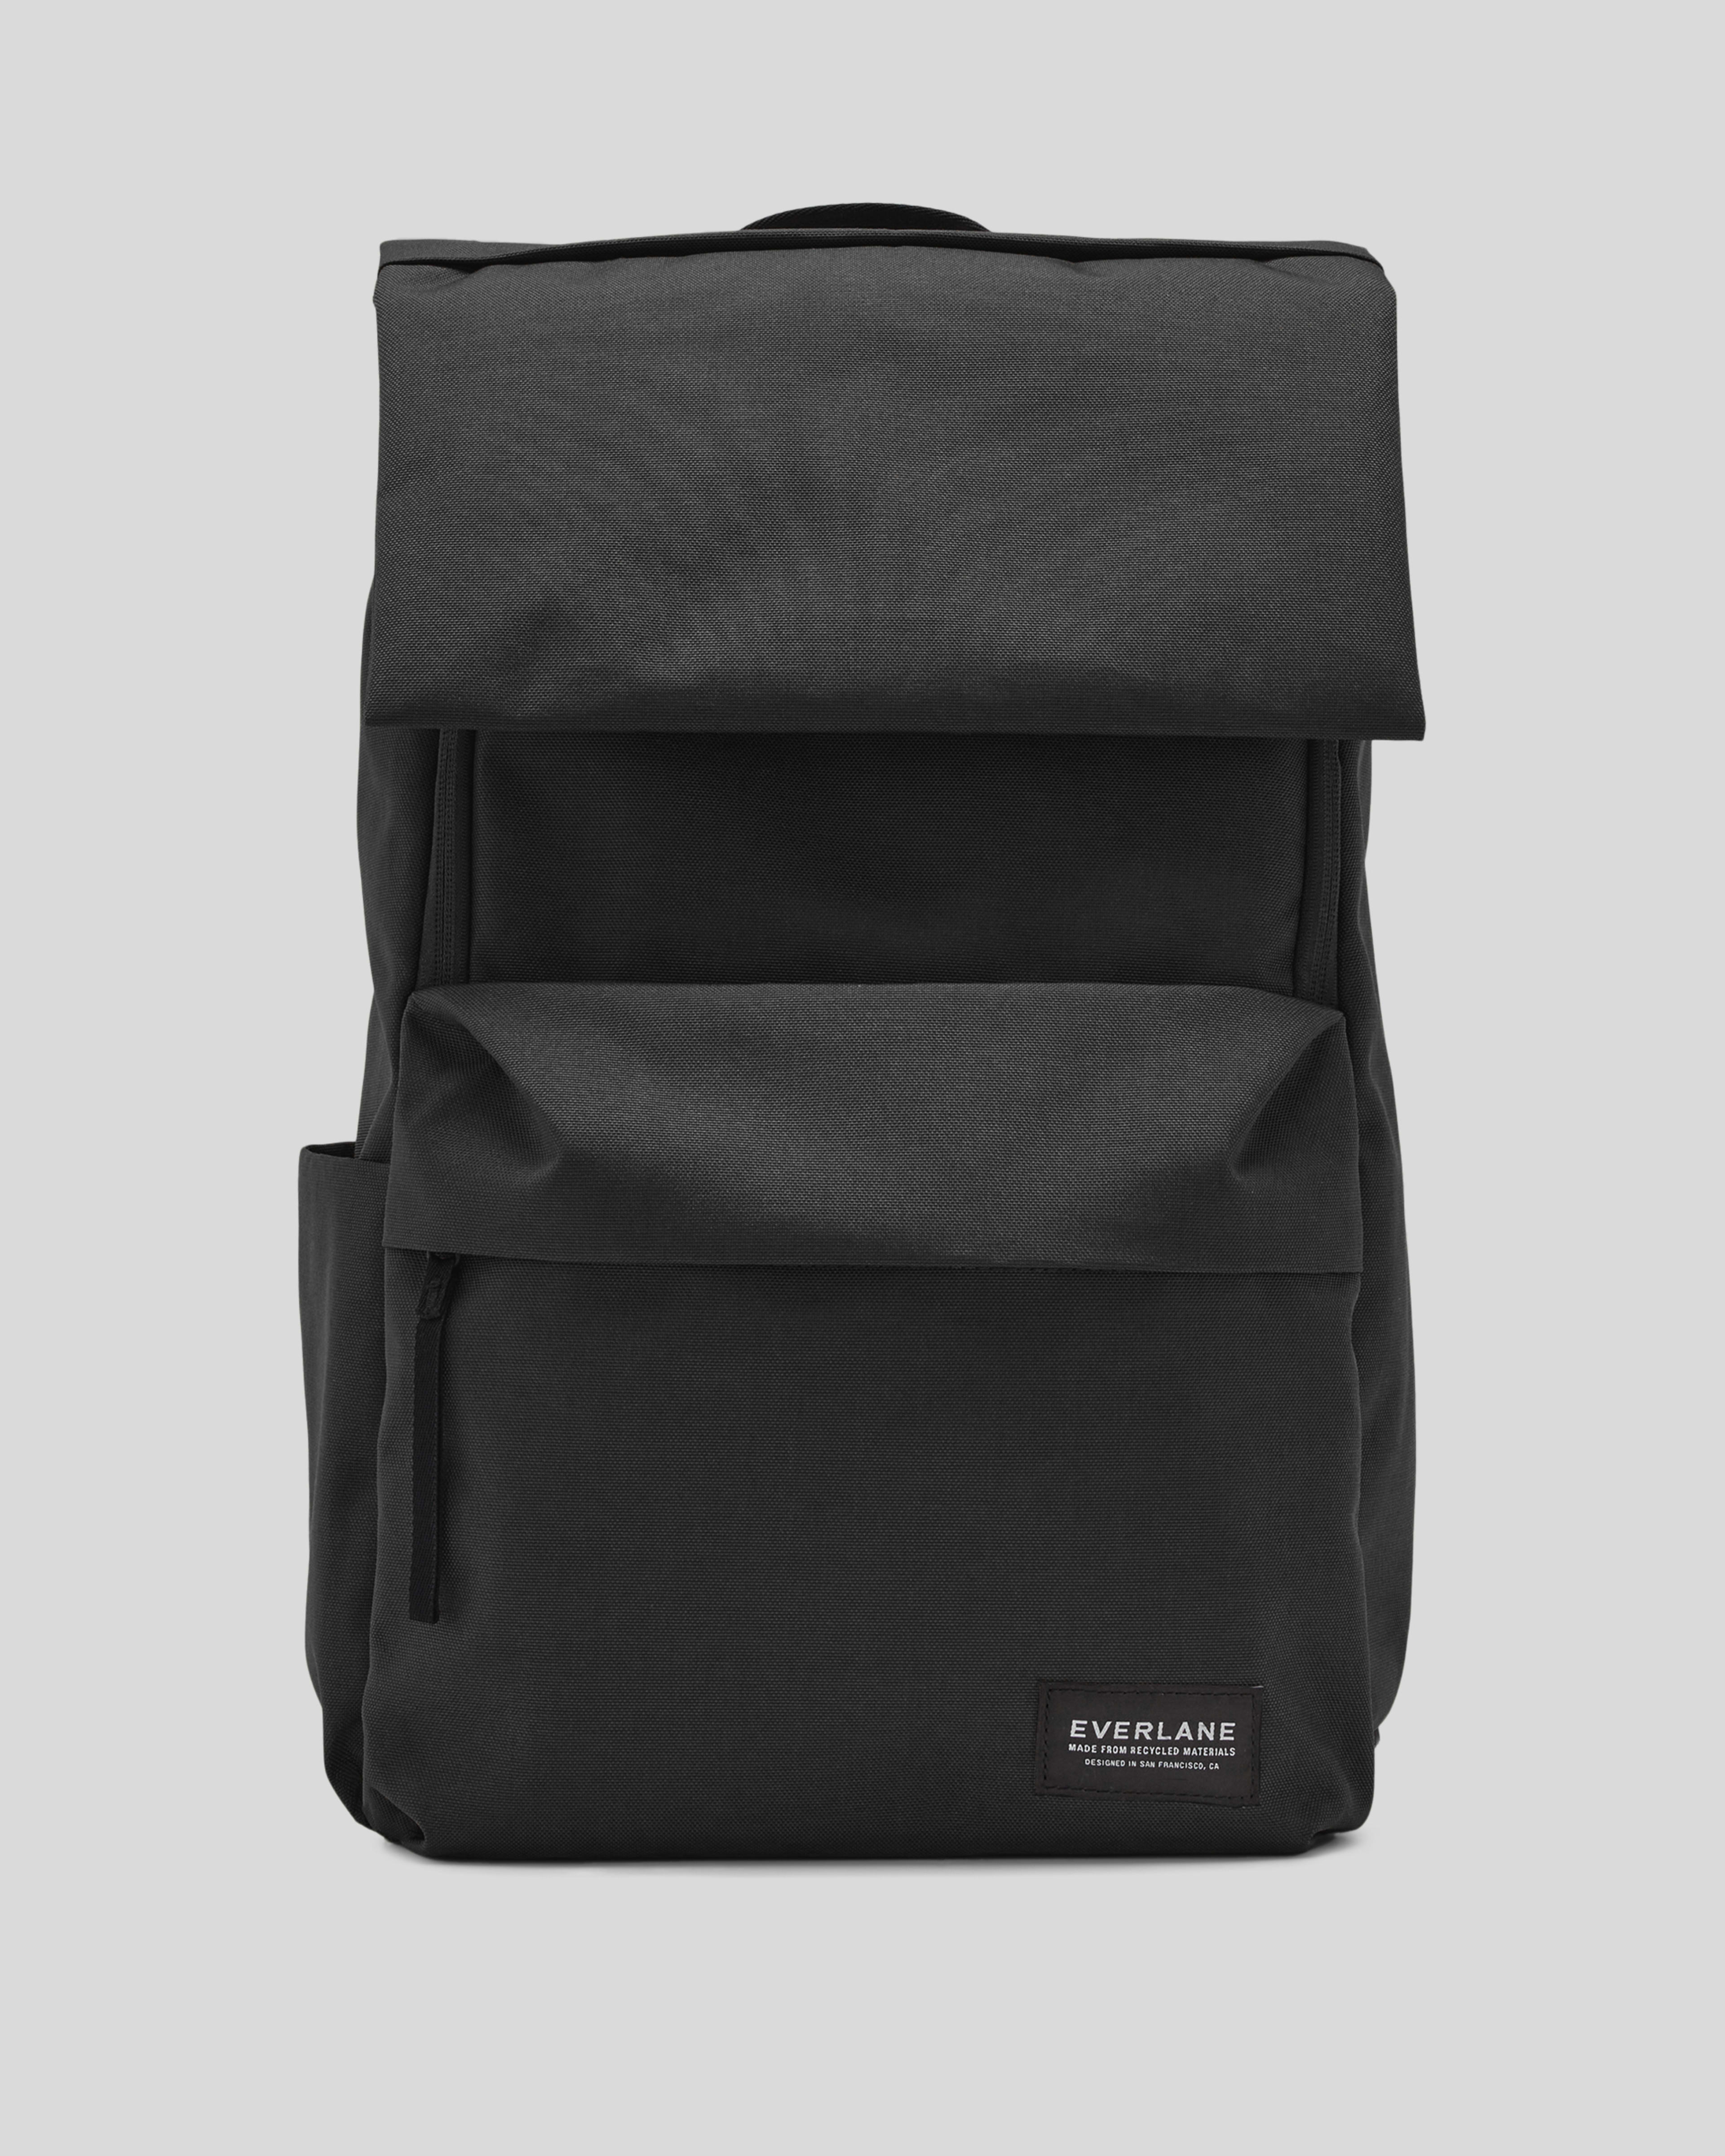 Is Everlane's ReNew Transit Backpack an Ideal Carry-On? - InsideHook